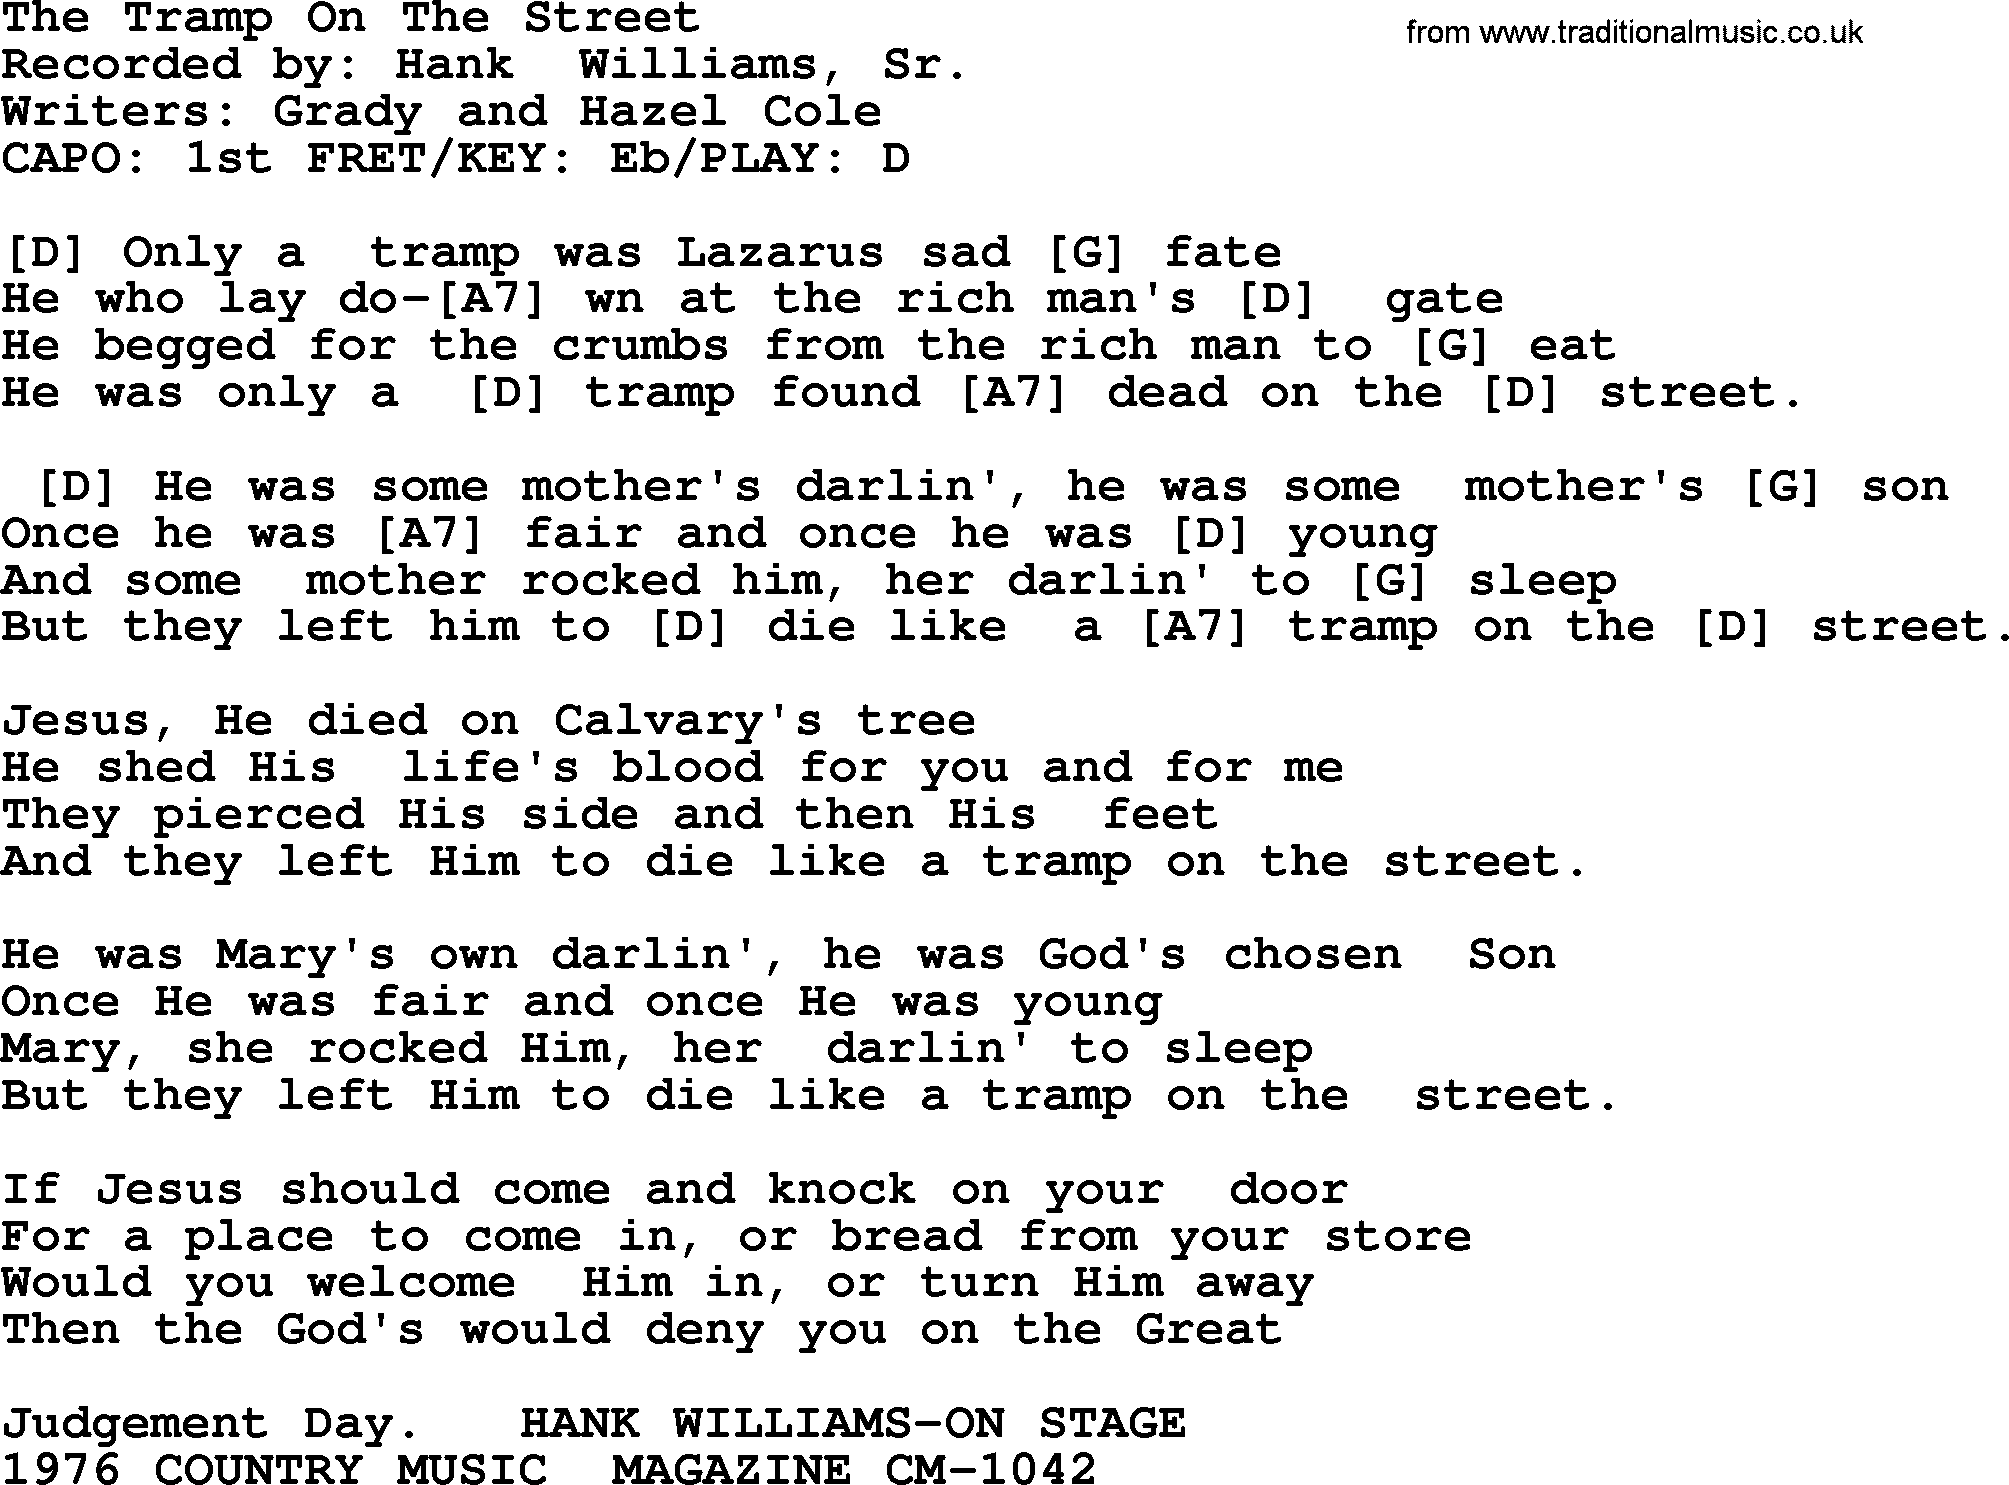 Hank Williams song The Tramp On The Street, lyrics and chords